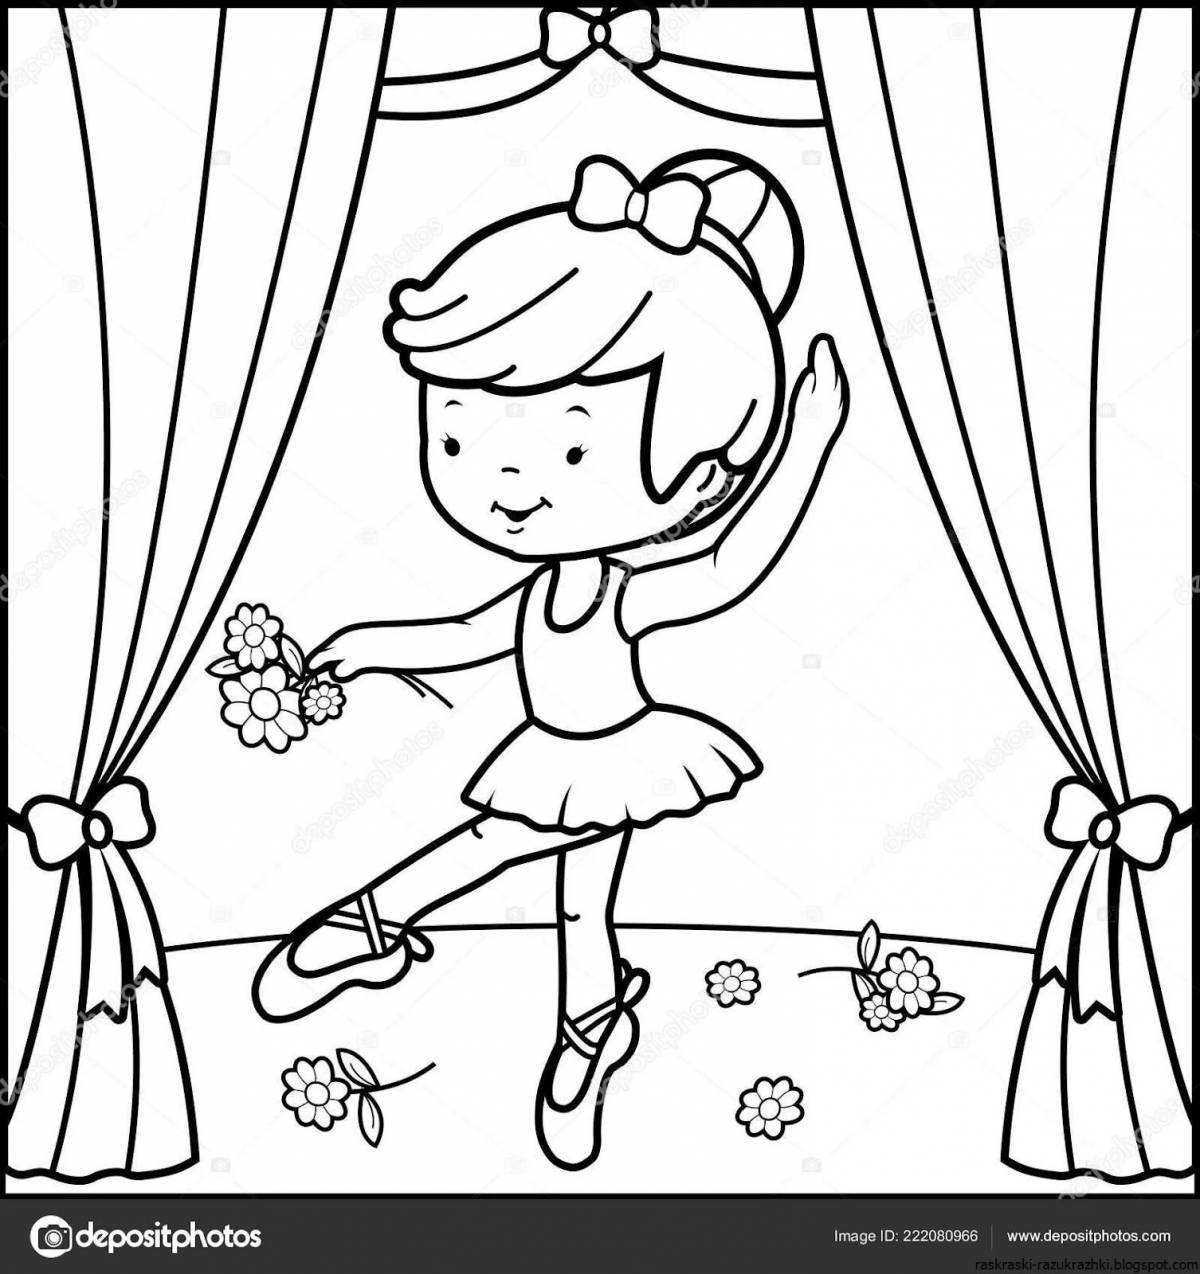 Joyful theatrical coloring for kids